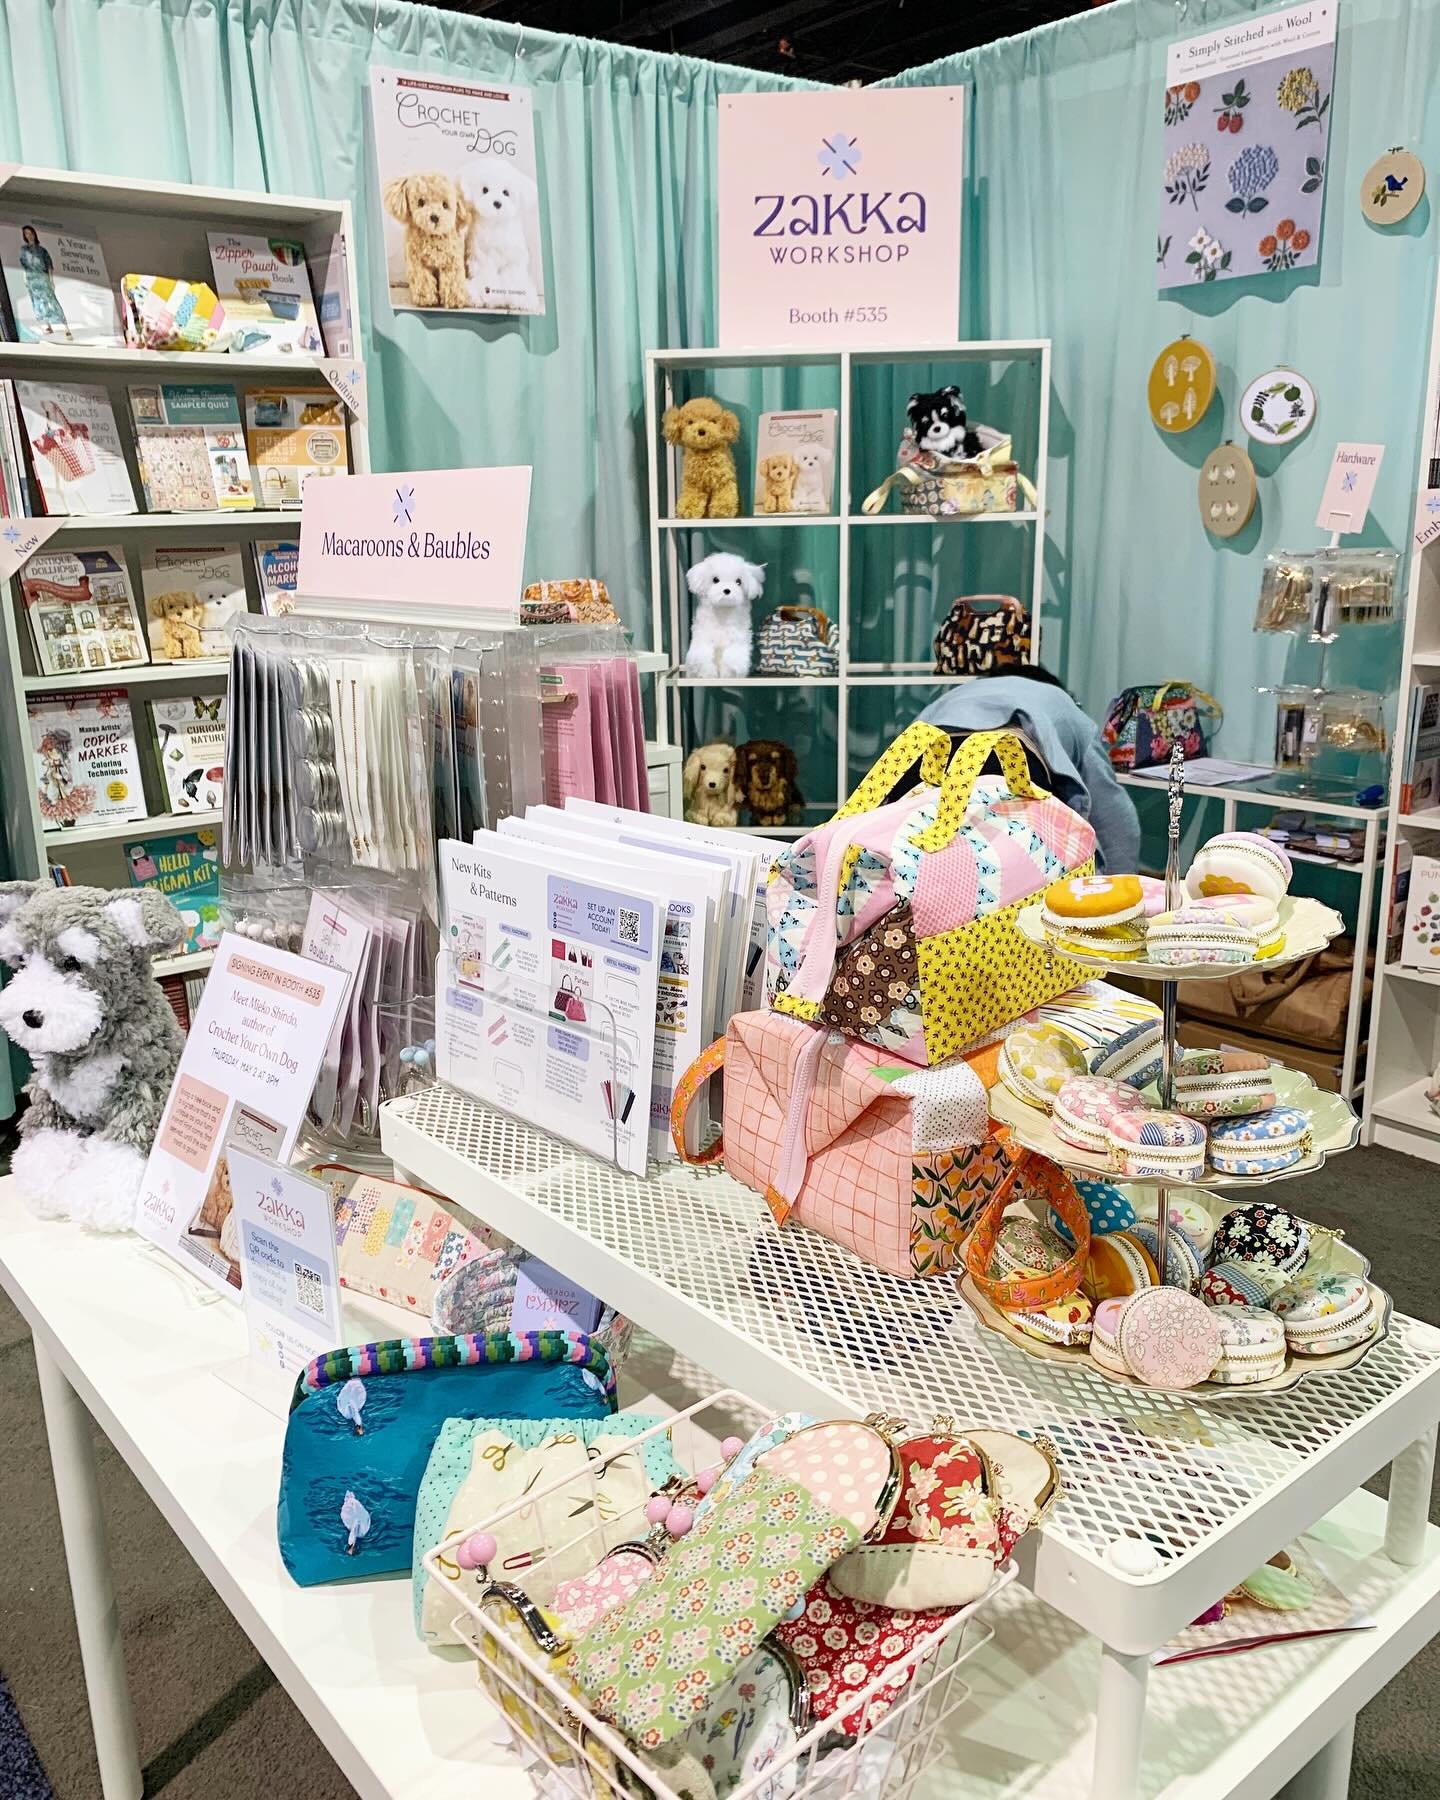 Come visit us today at @hhamericas in booth 535 we are ready to have more fun and make new friends!!
.
.
#zakkaworkshop #hhamericas #craftshow